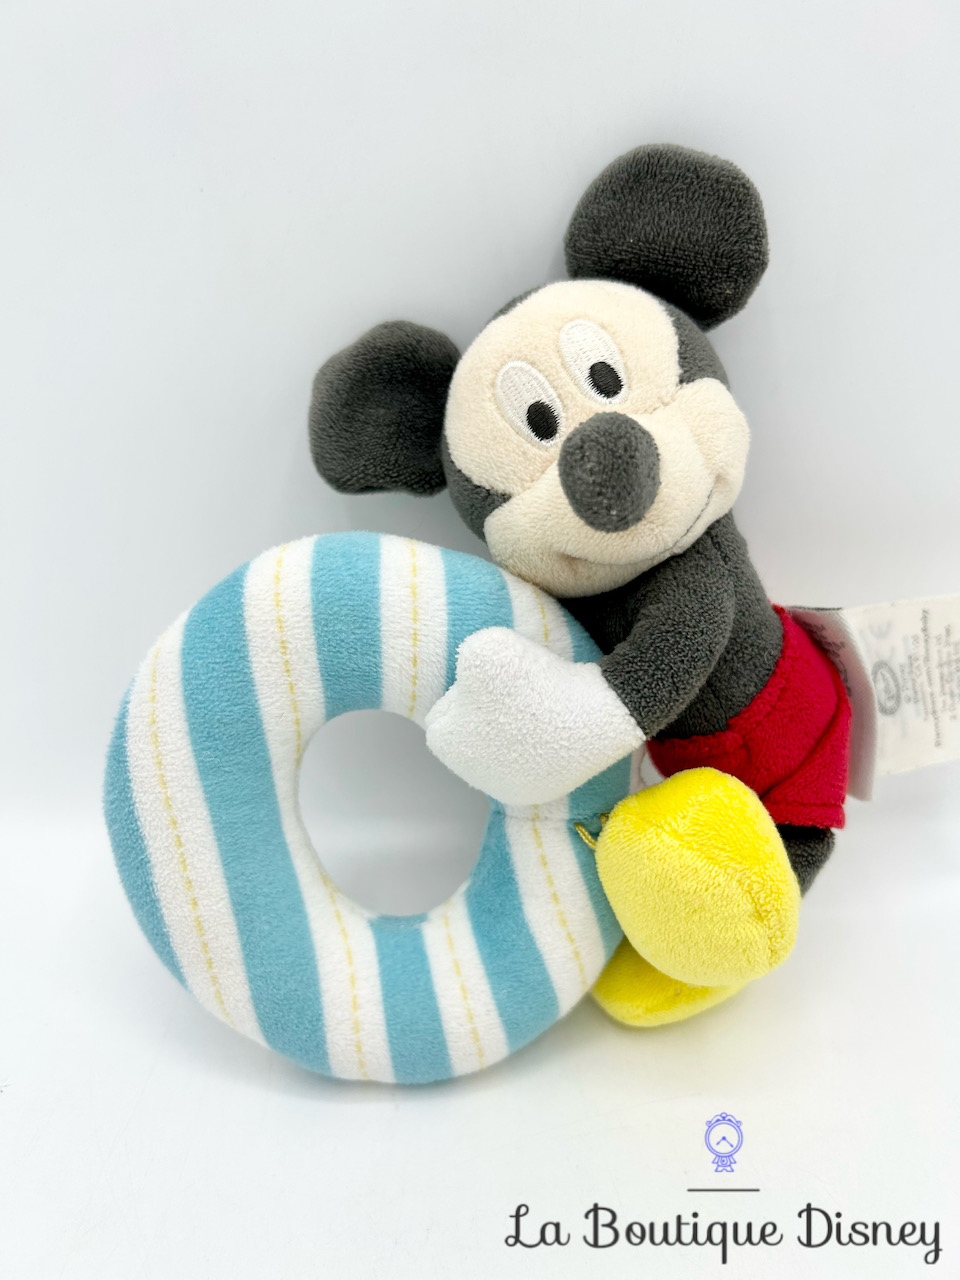 hochet-mickey-mouse-peluche-disney-store-anneau-rayures-1